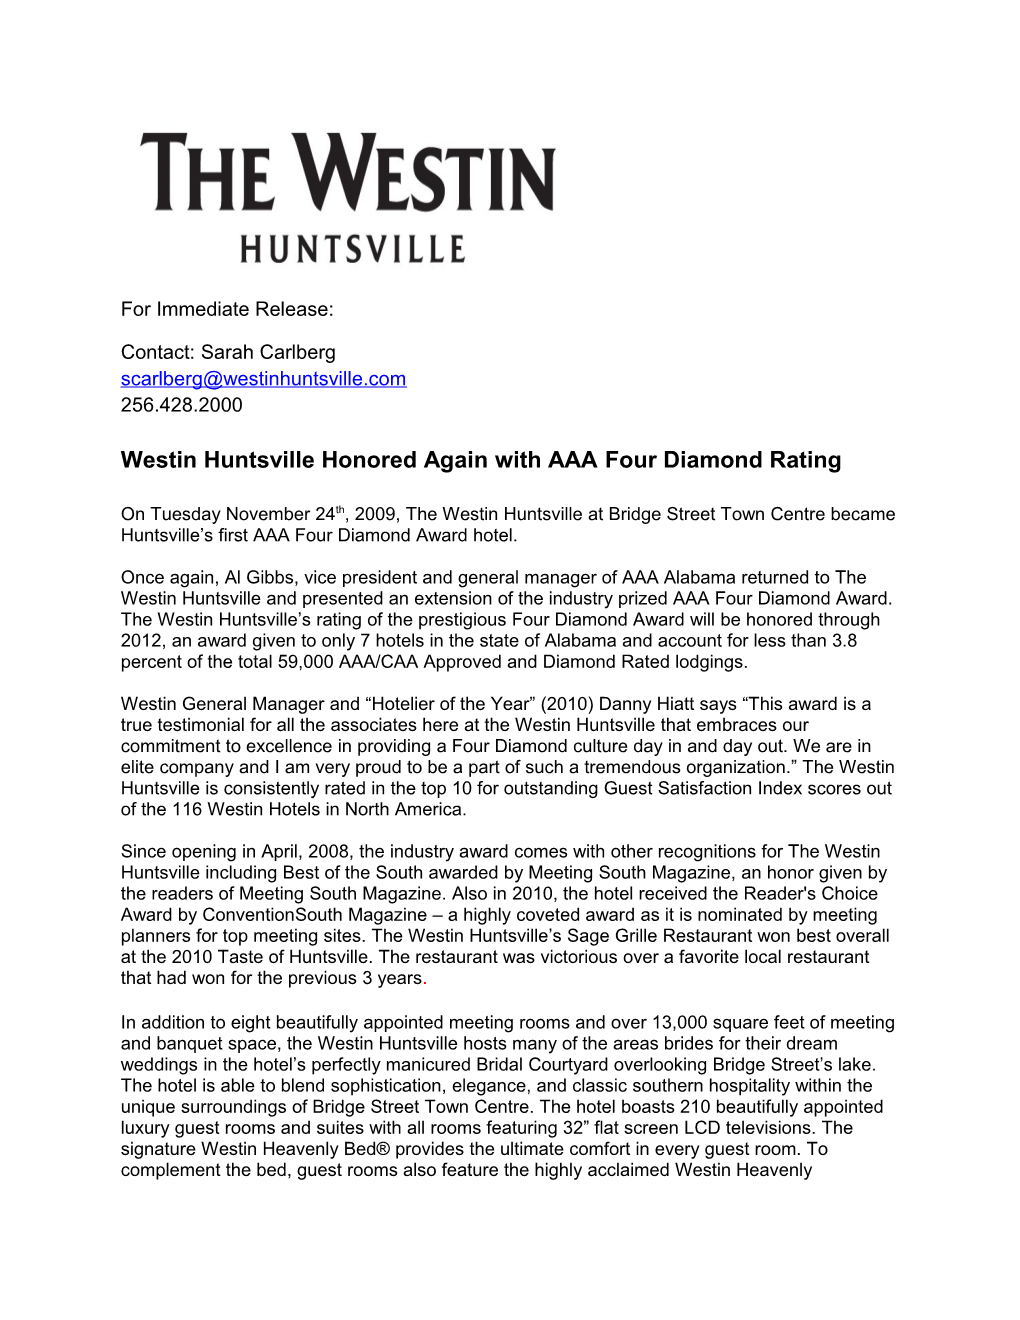 Westin Huntsville Honored Again with AAA Four Diamond Rating